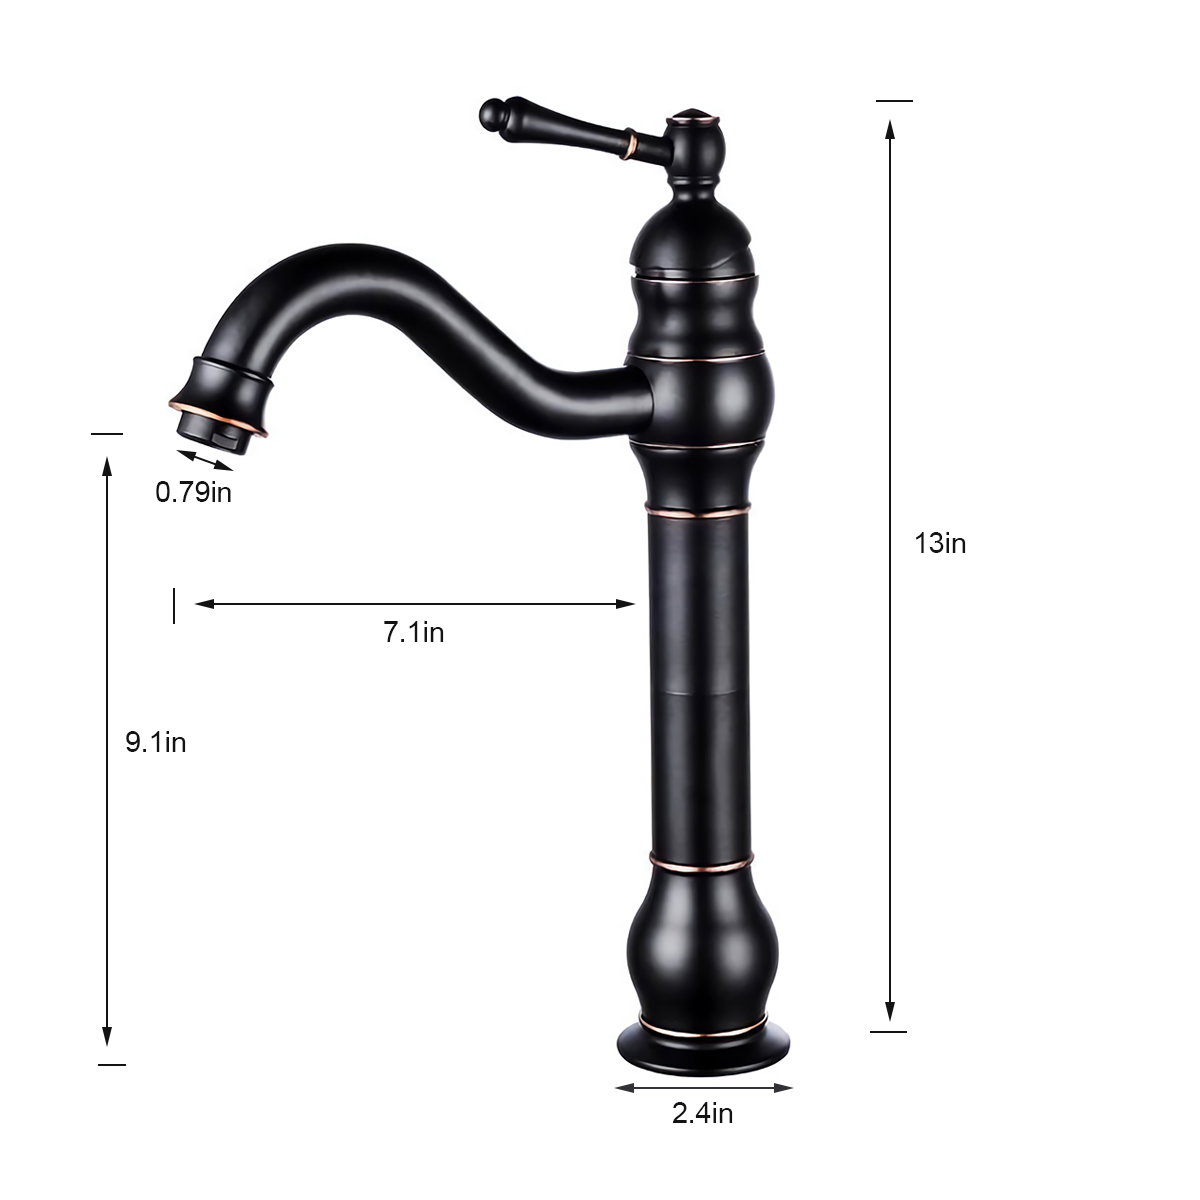 Oil Rubbed Bronze Vessel Sink Faucet Bathroom 360 Degree Swivel Single Lever Handle Bowl One Hole Tap Mixer